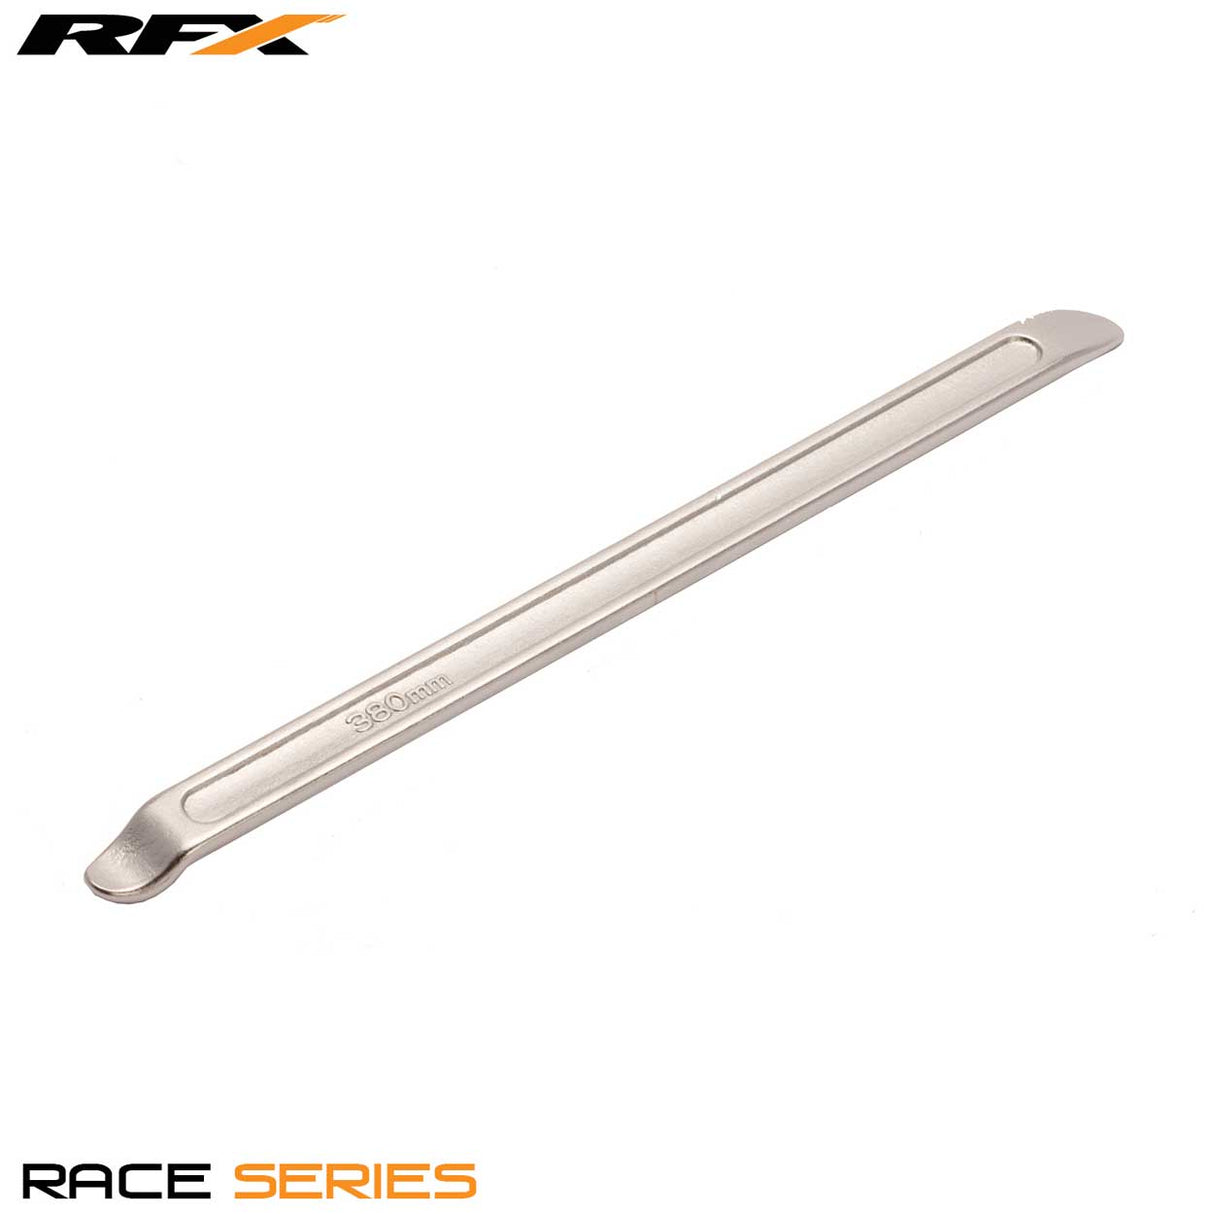 RFX Race Dual Spoon end Tyre Lever Universal 280mm / 11in Long